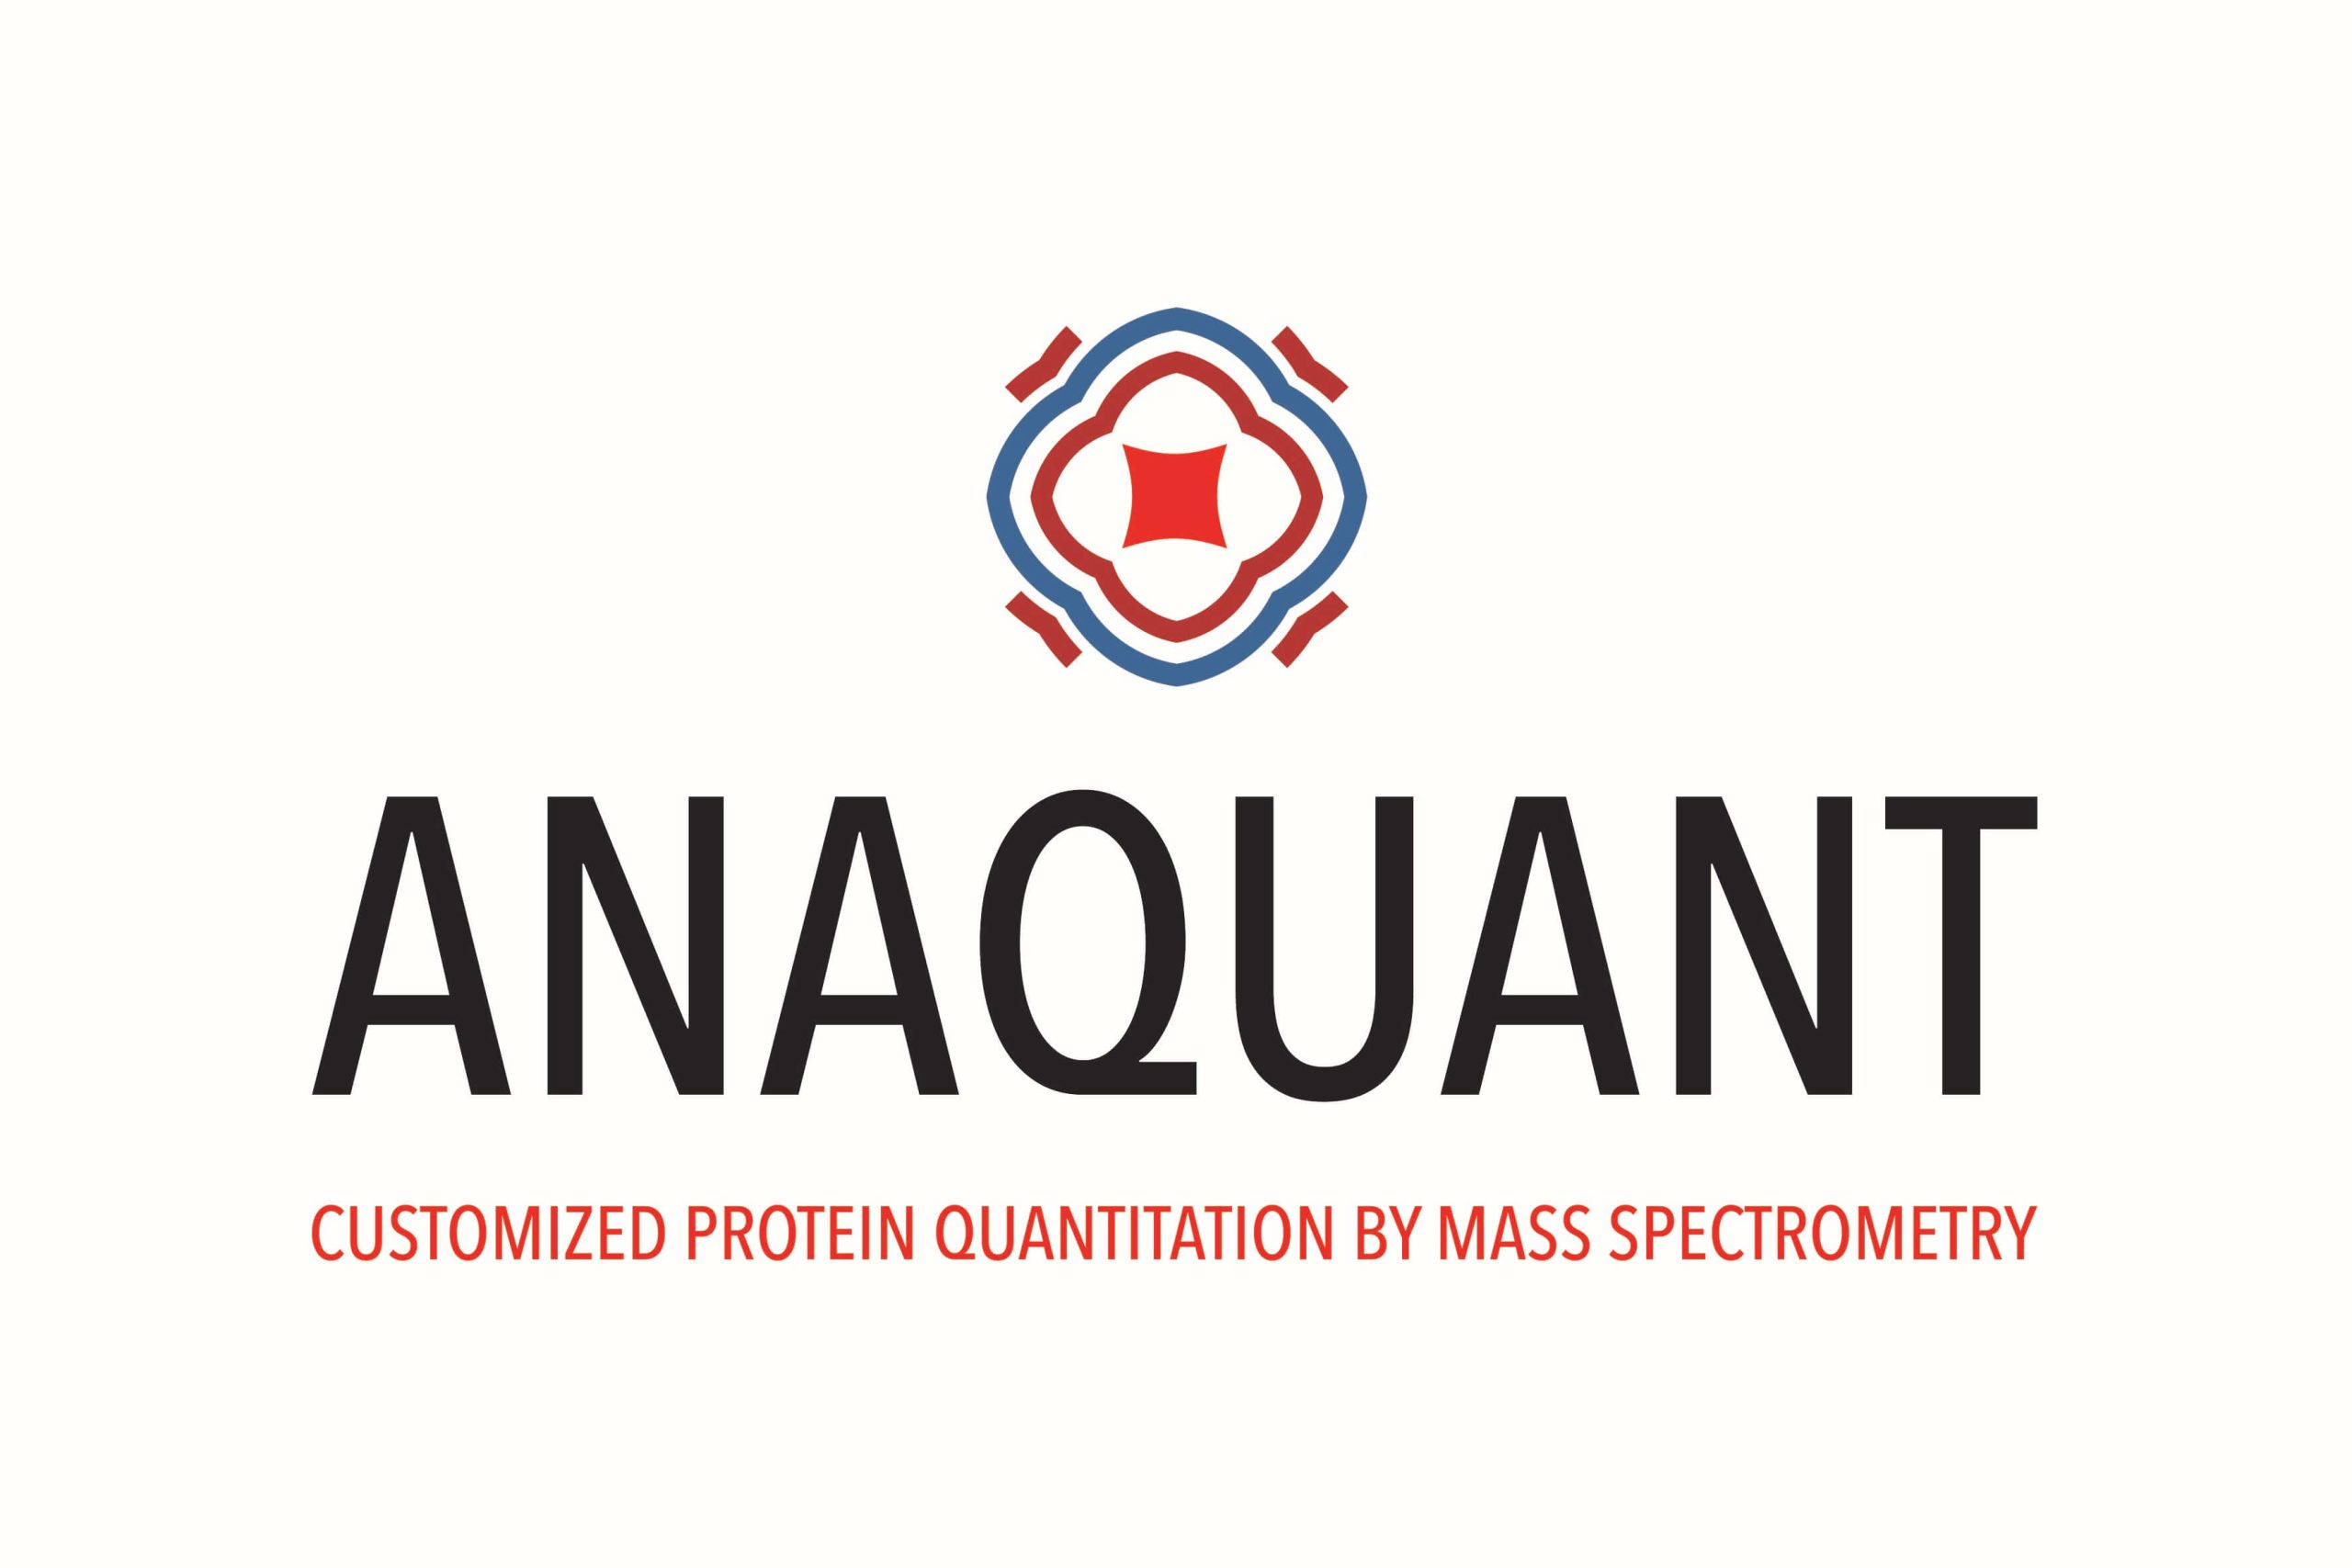 ANAQUANT